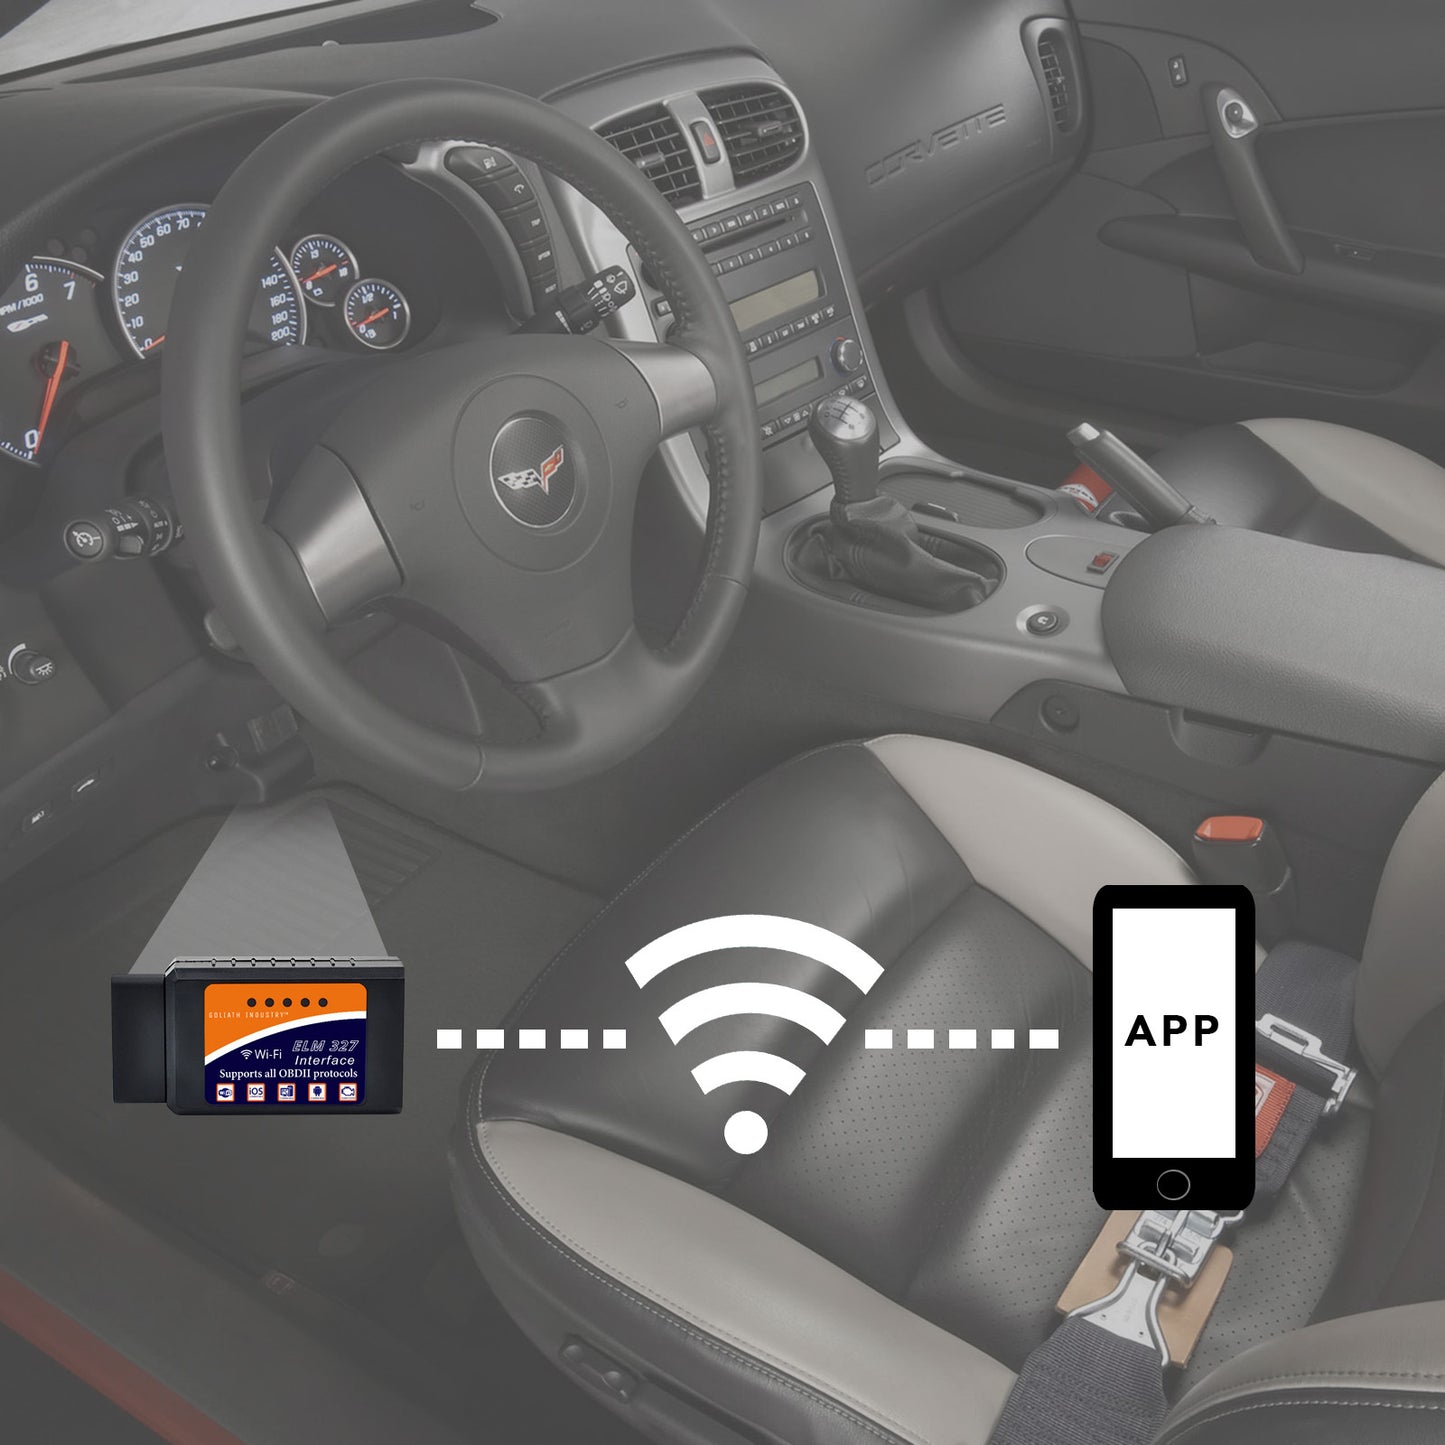 KOBRA Wireless OBD2 Car Code Reader Scan Tool OBD Scanner Connects Via WiFi With IOS, Android & Windows Device, Features 3000 Code Database, For Most Vehicles In the USA! Diagnose Your Car Like a Pro!